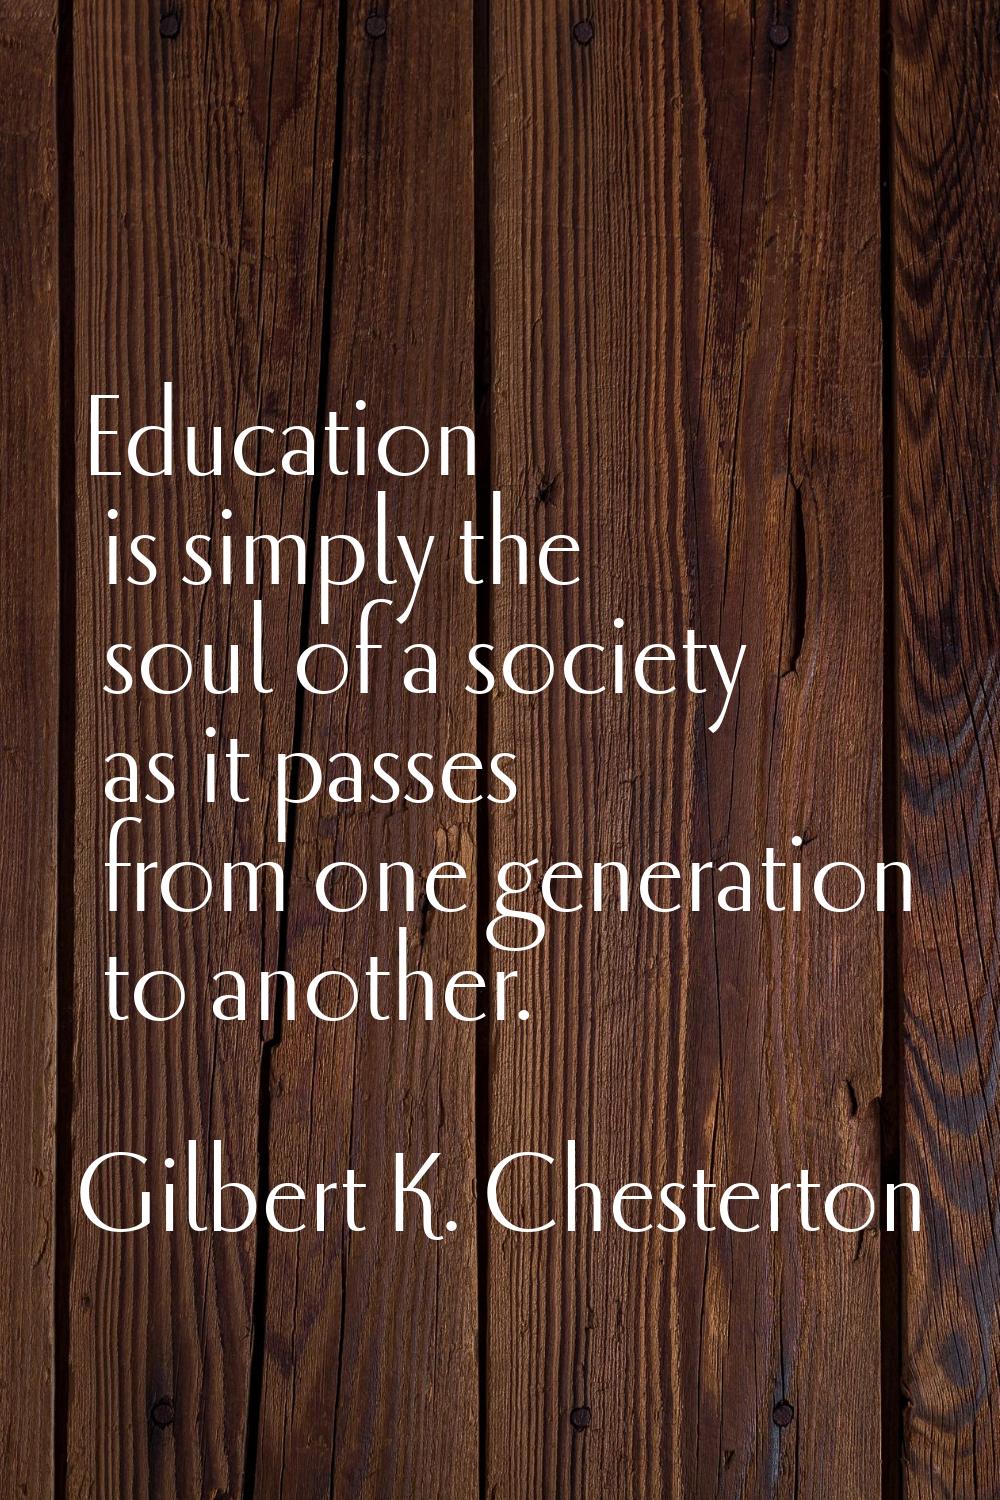 Education is simply the soul of a society as it passes from one generation to another.